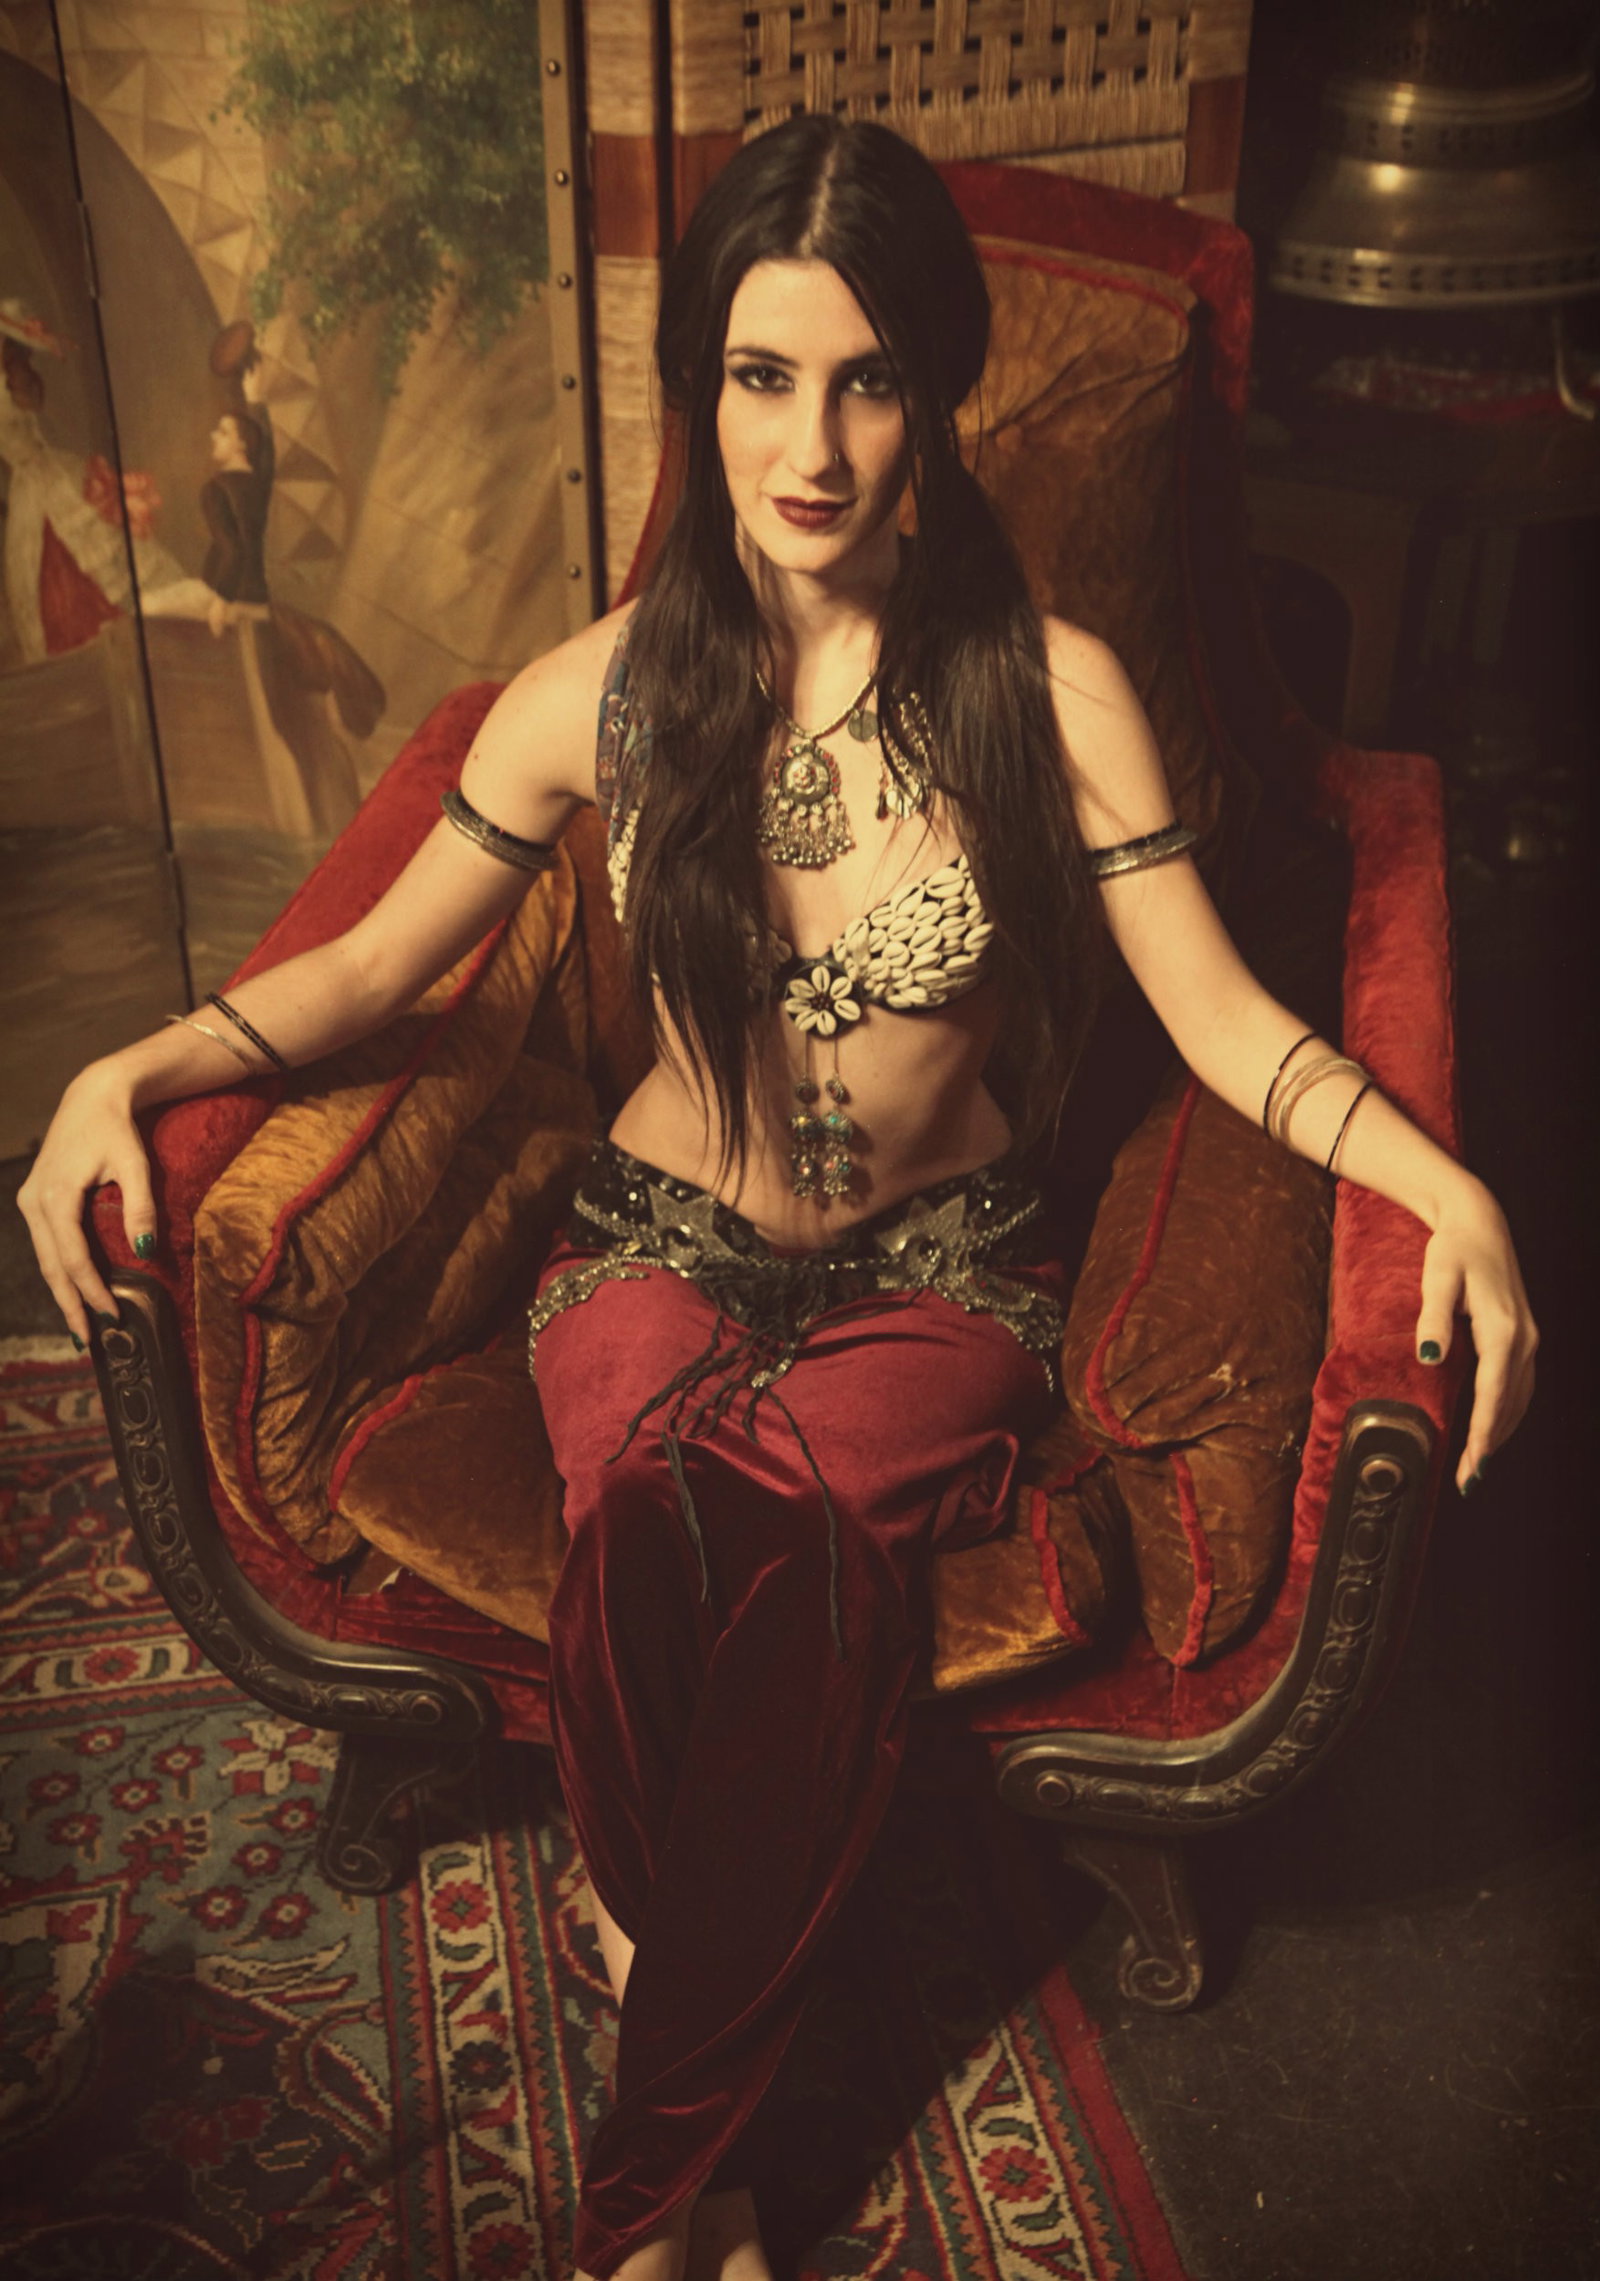 Photo by Schadenfreude with the username @Schadenfreude,  October 20, 2015 at 11:16 PM and the text says 'kierstenvalence:

“Sorcery”. Belly dancer Kiersten Valence photographed by CreativeDreams. #female  #seated  #throne  #sfw'